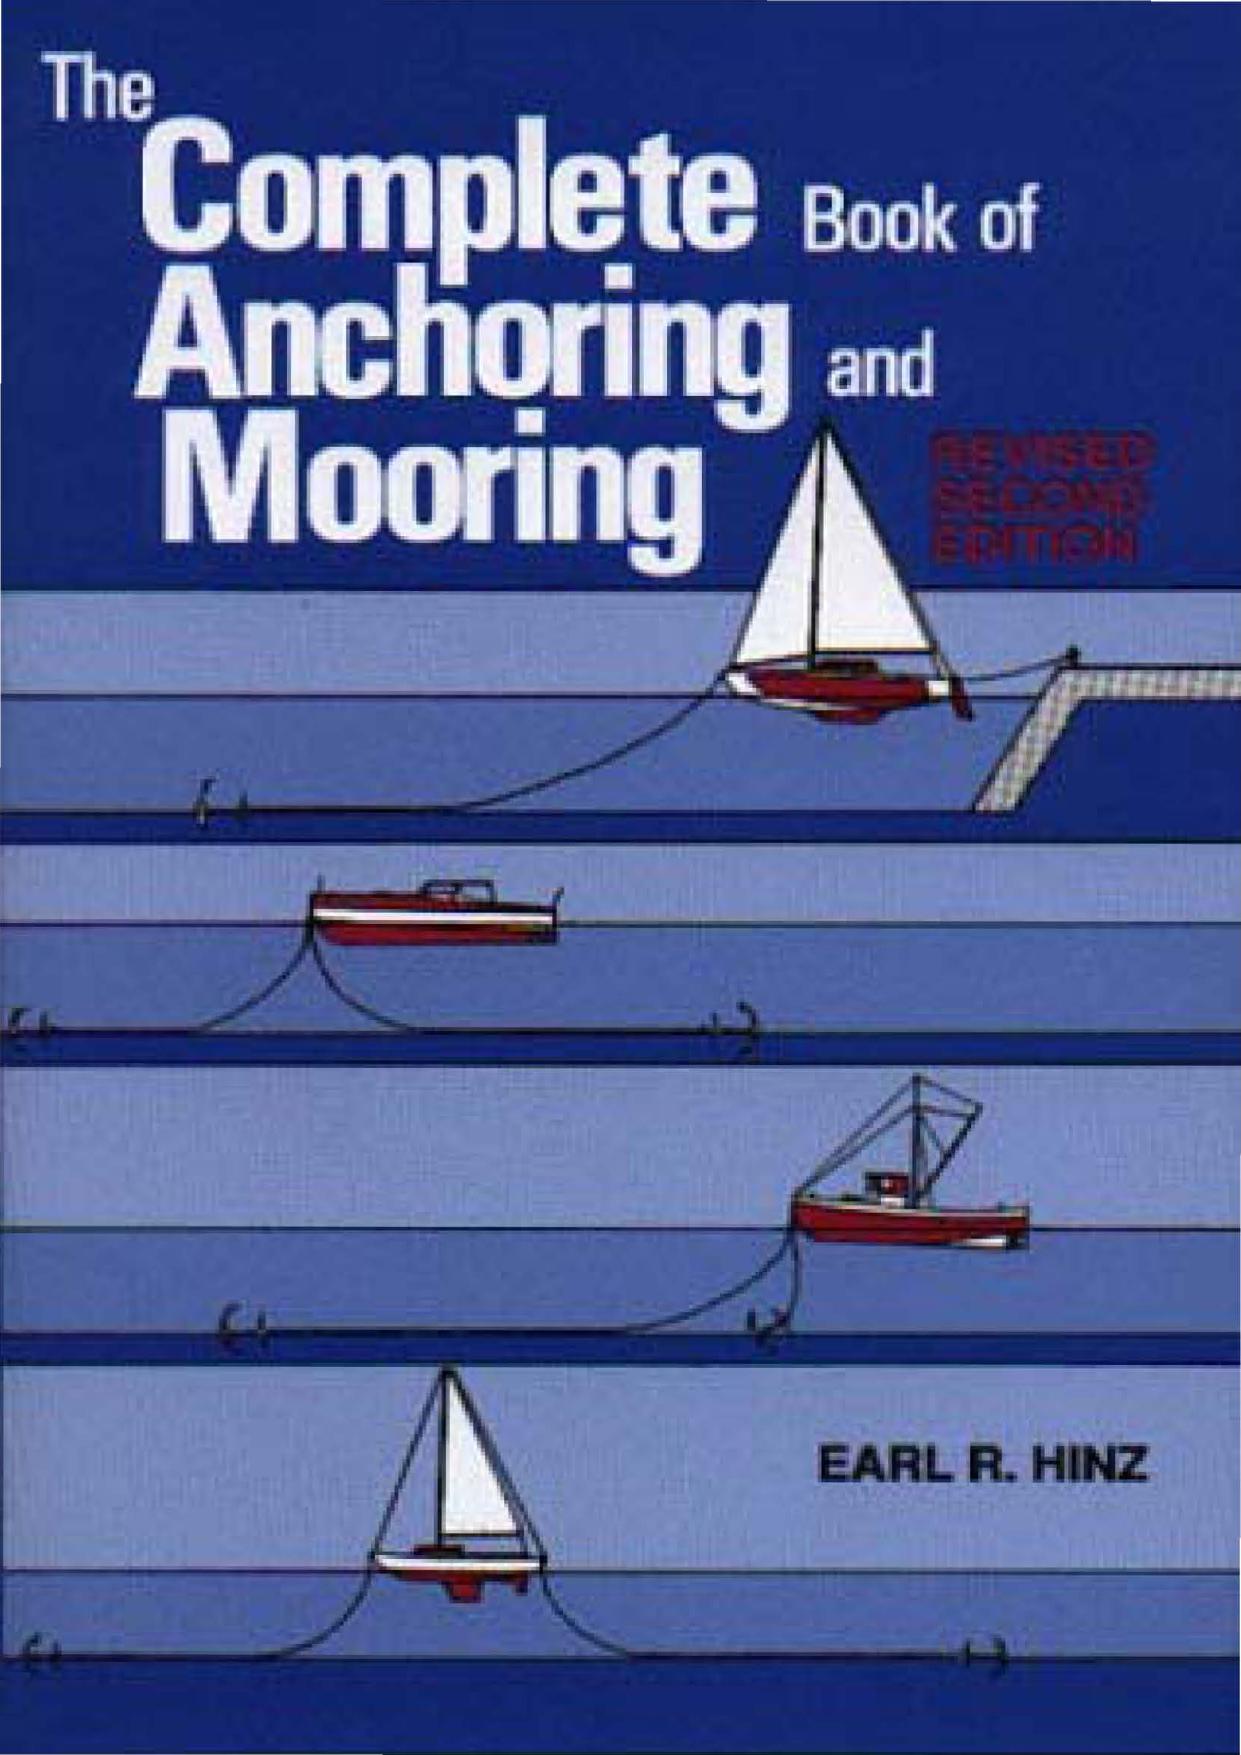 The Complete Anchoring Handbook: Stay Put on Any Bottom in Any Weather